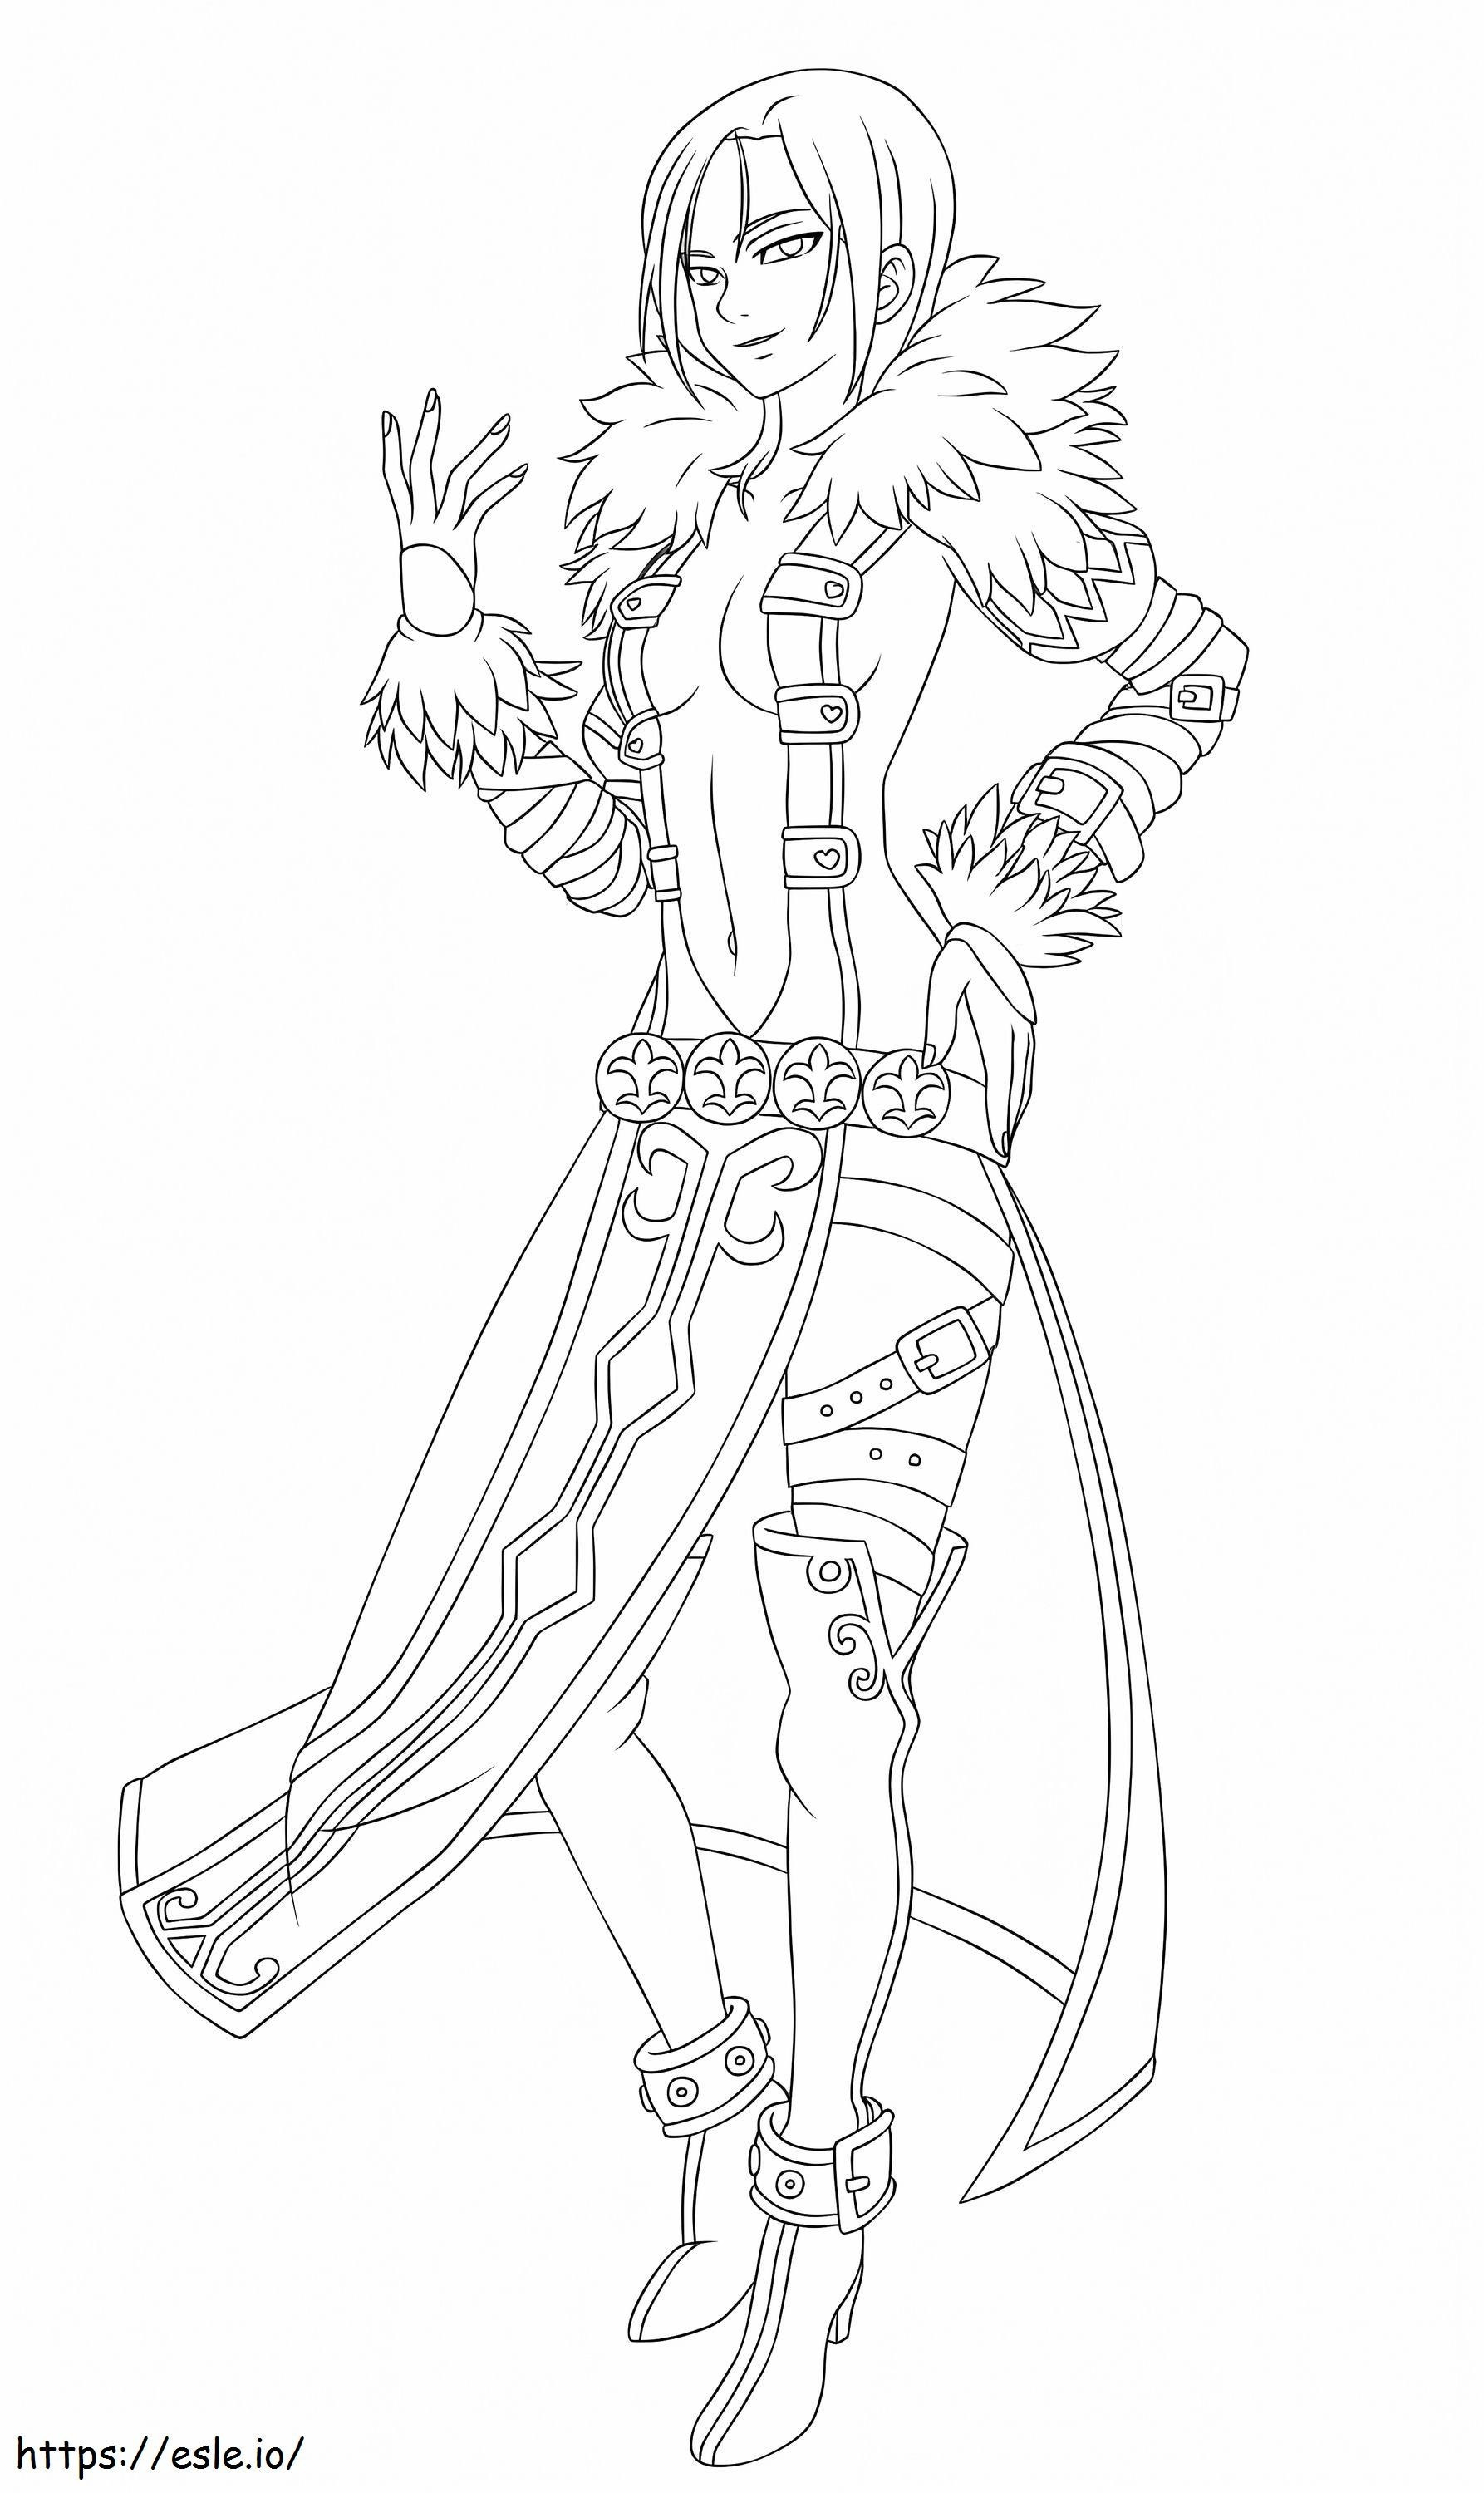 Merlin 1 coloring page